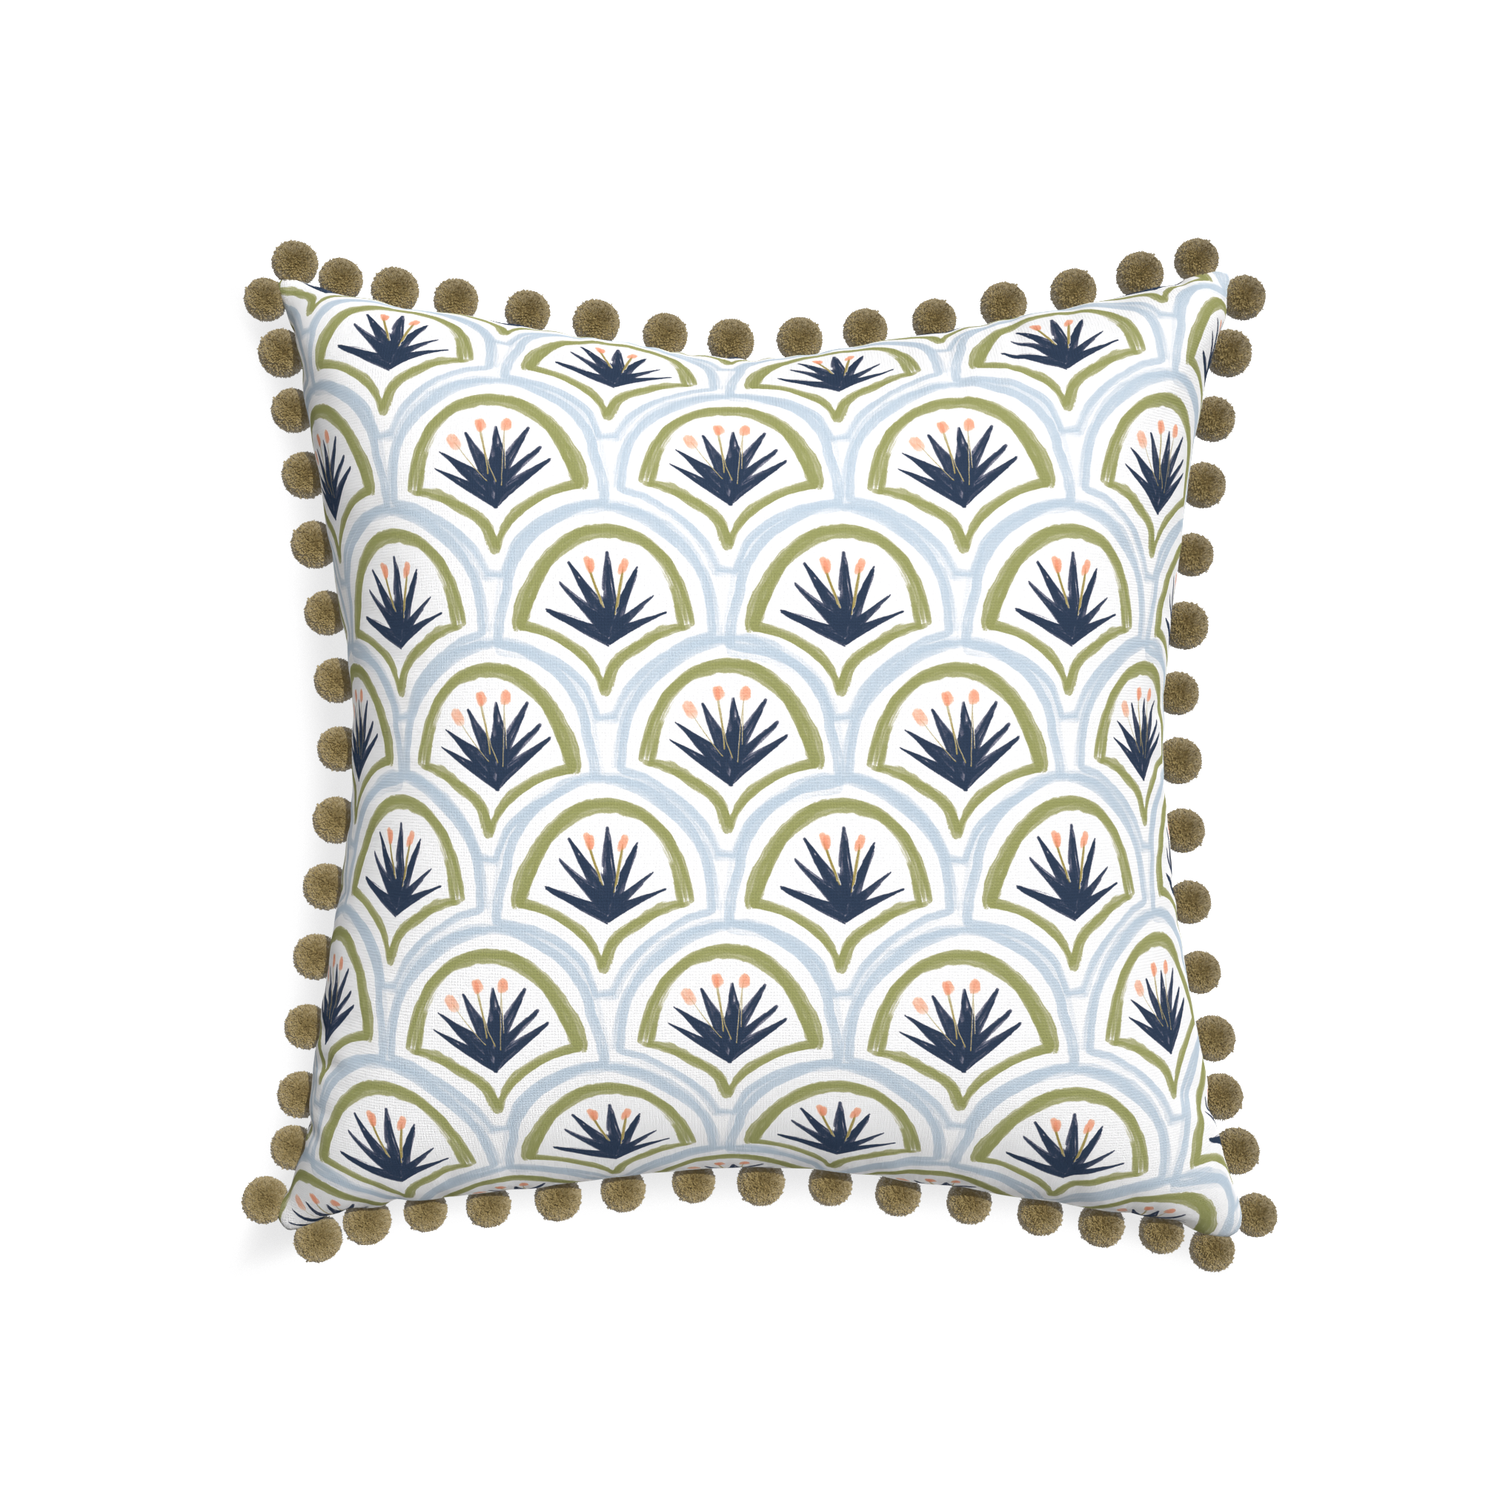 22-square thatcher midnight custom art deco palm patternpillow with olive pom pom on white background